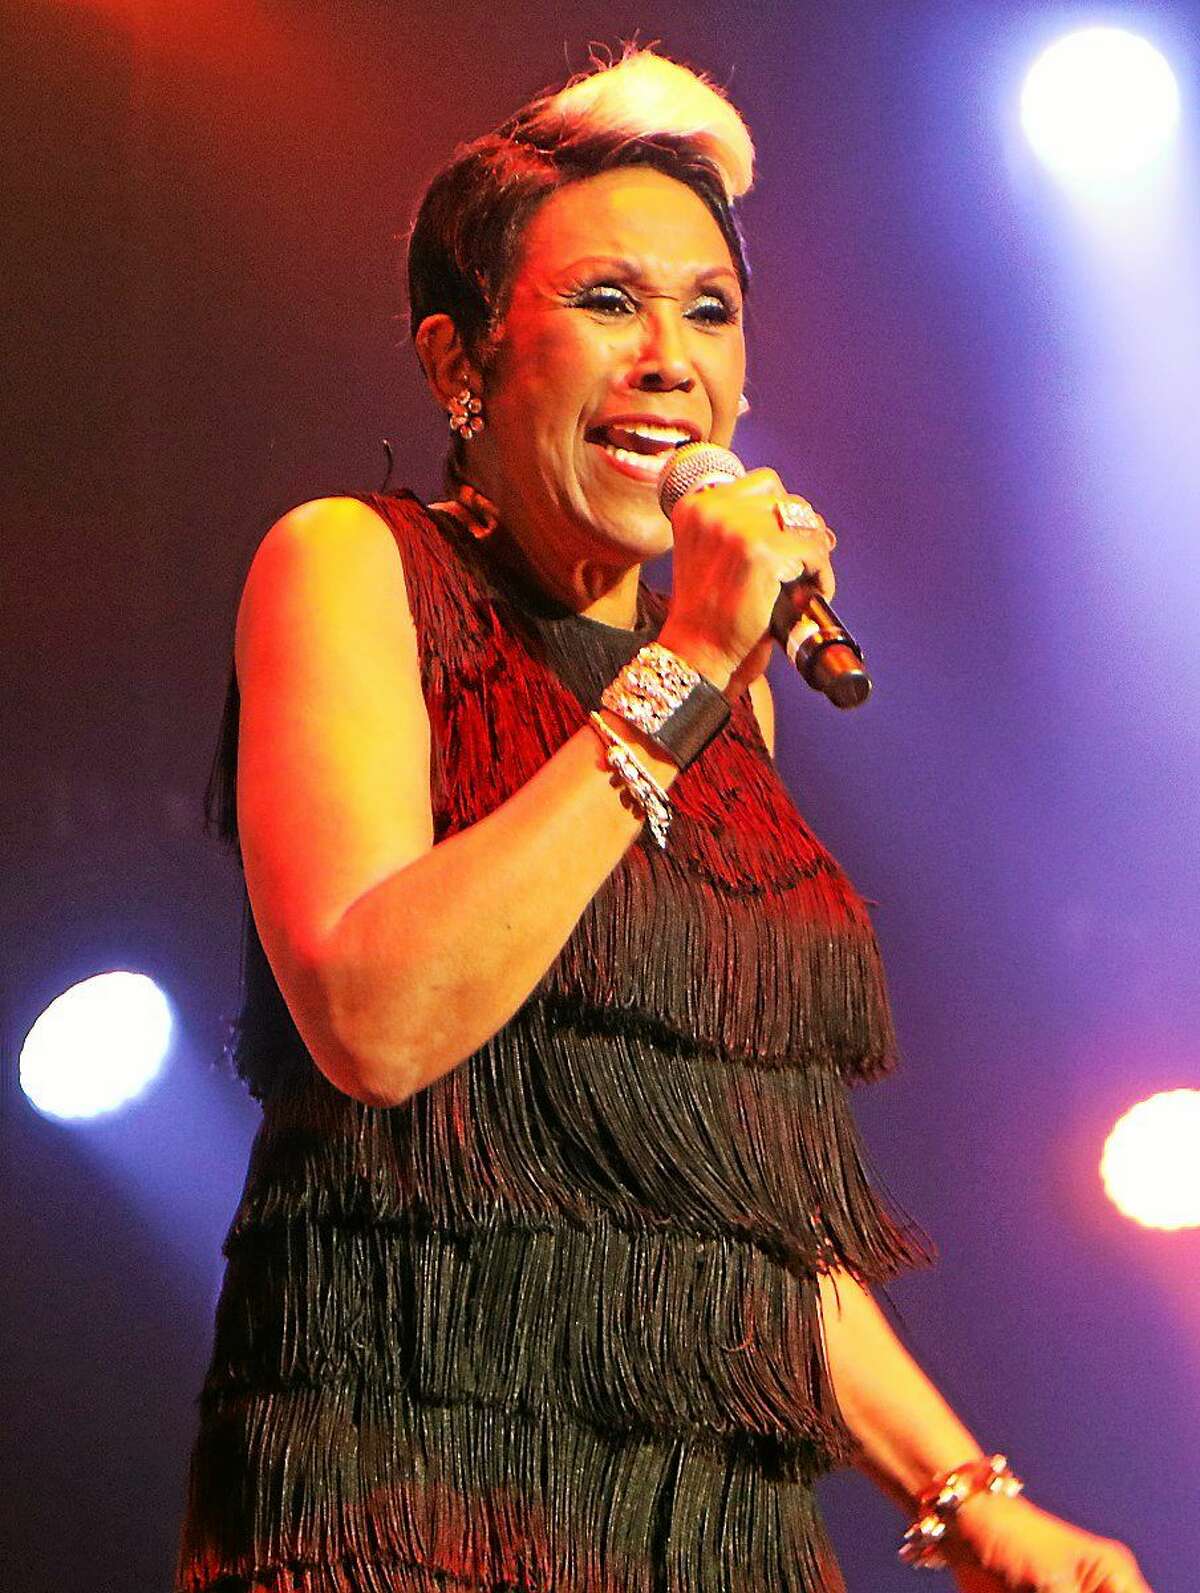 Photo by John Atashian Singer Ruth Pointer, best known for being the eldest member of the legendary Pointer Sisters, performs at the Mohegan Sun Arena during the groups headline appearance on Feb. 6. Their set was part of the ì80ís Extravaganzaî concert which also included performances by singers Debbie Gibson, Terri Nunn & Berlin, Tiffany, Shannon, Club Nouveau and Andy Bell of Erasure.